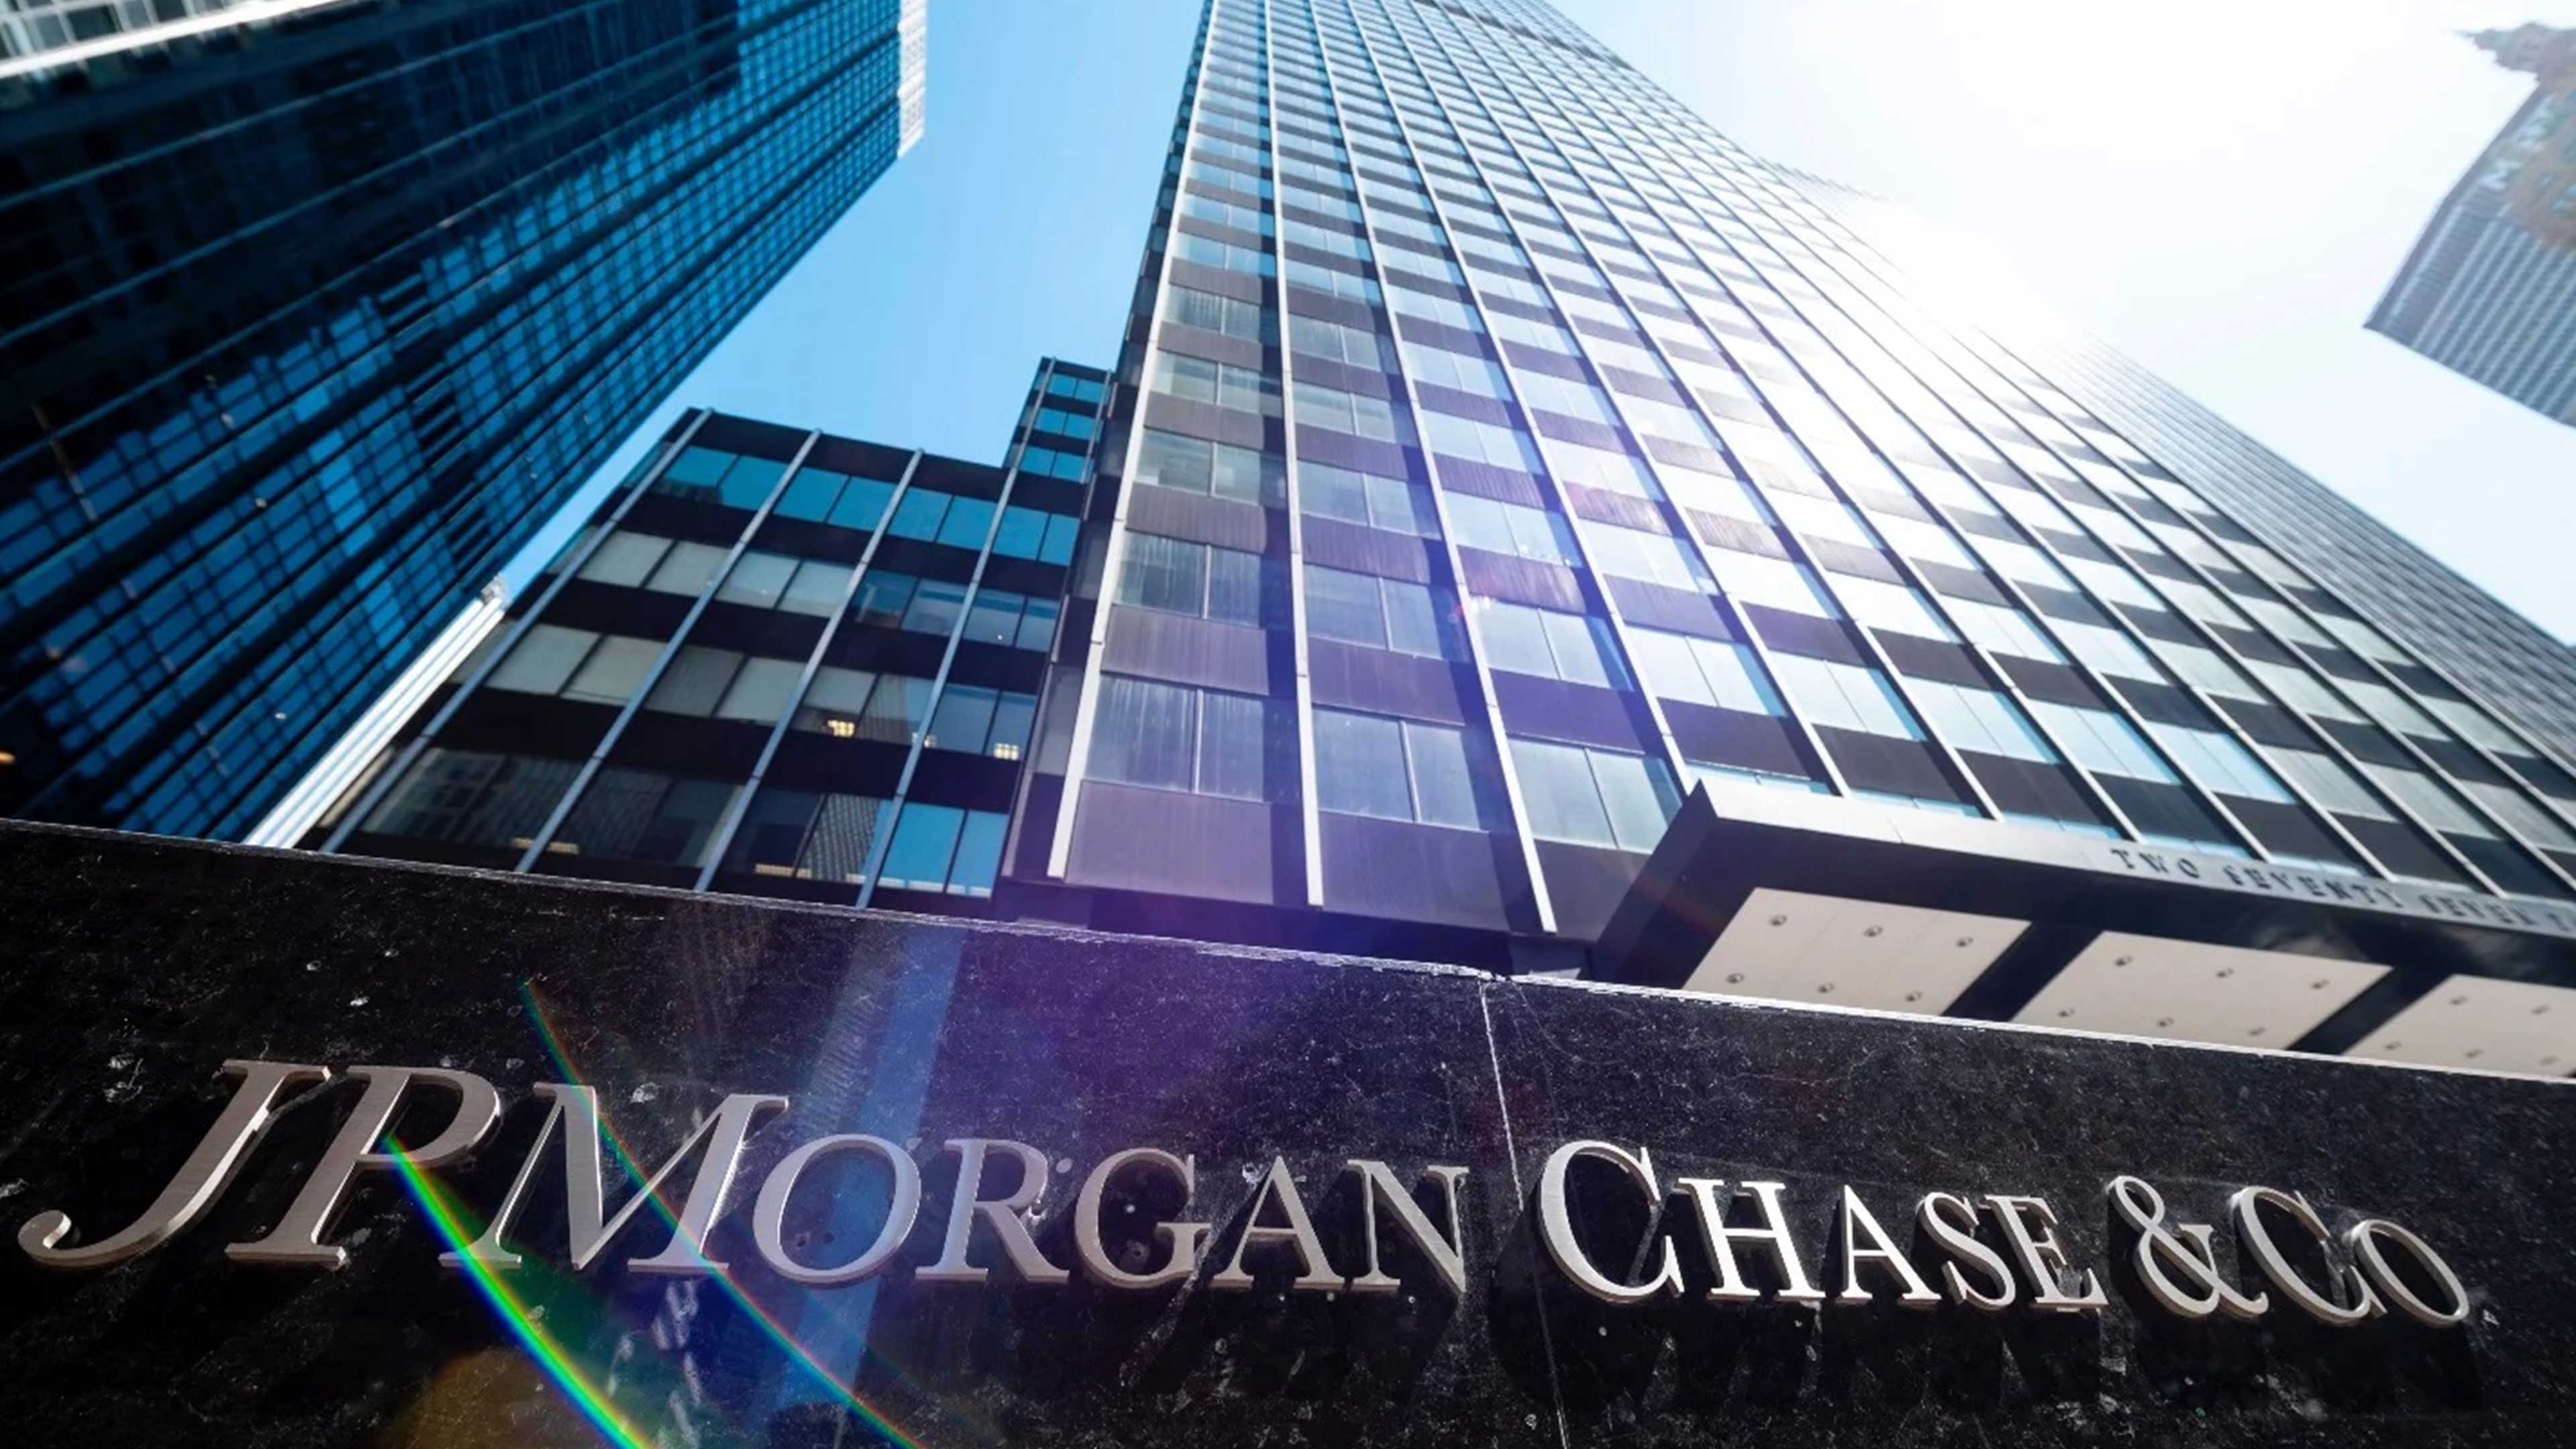 JPMorgan Chase is Donating $5 Million to These LGBTQ+ Causes